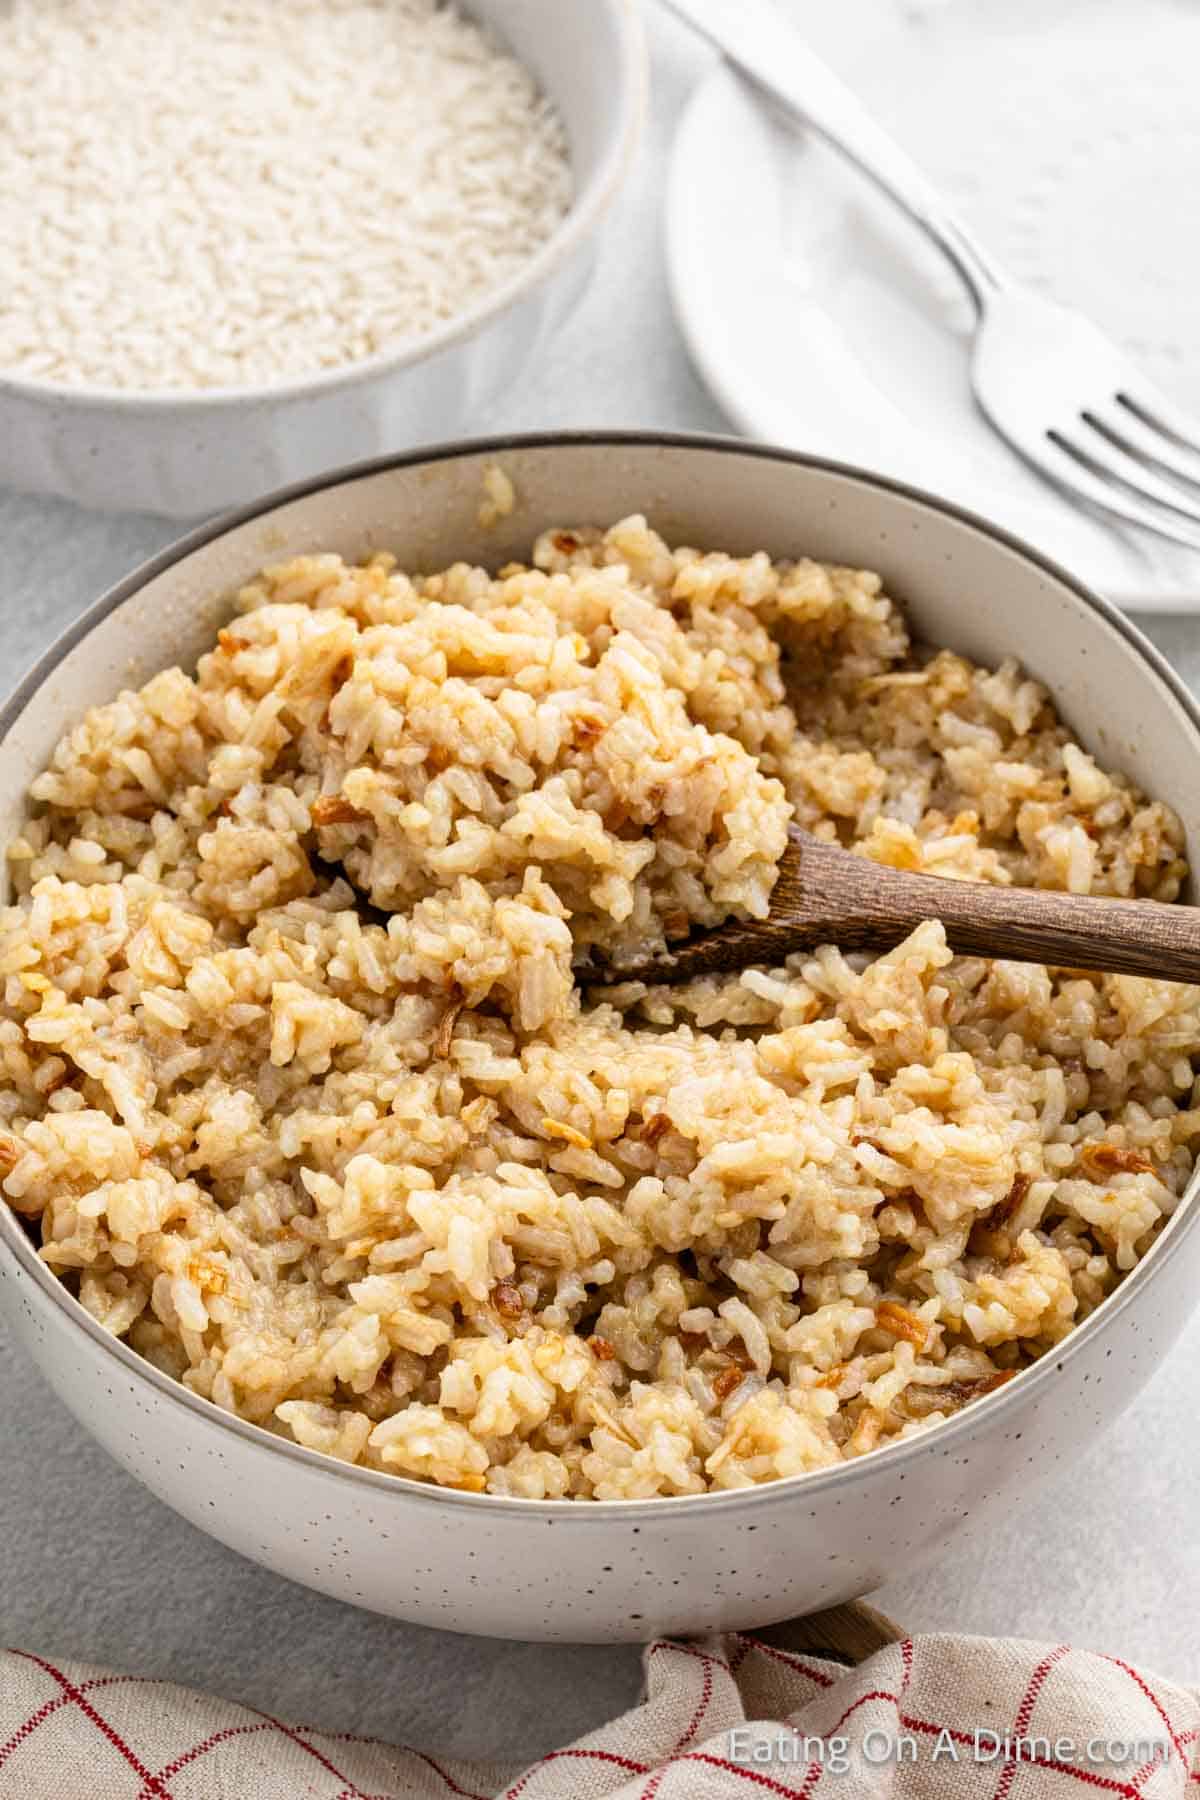 Butter rice in a bowl with a wooden spoon